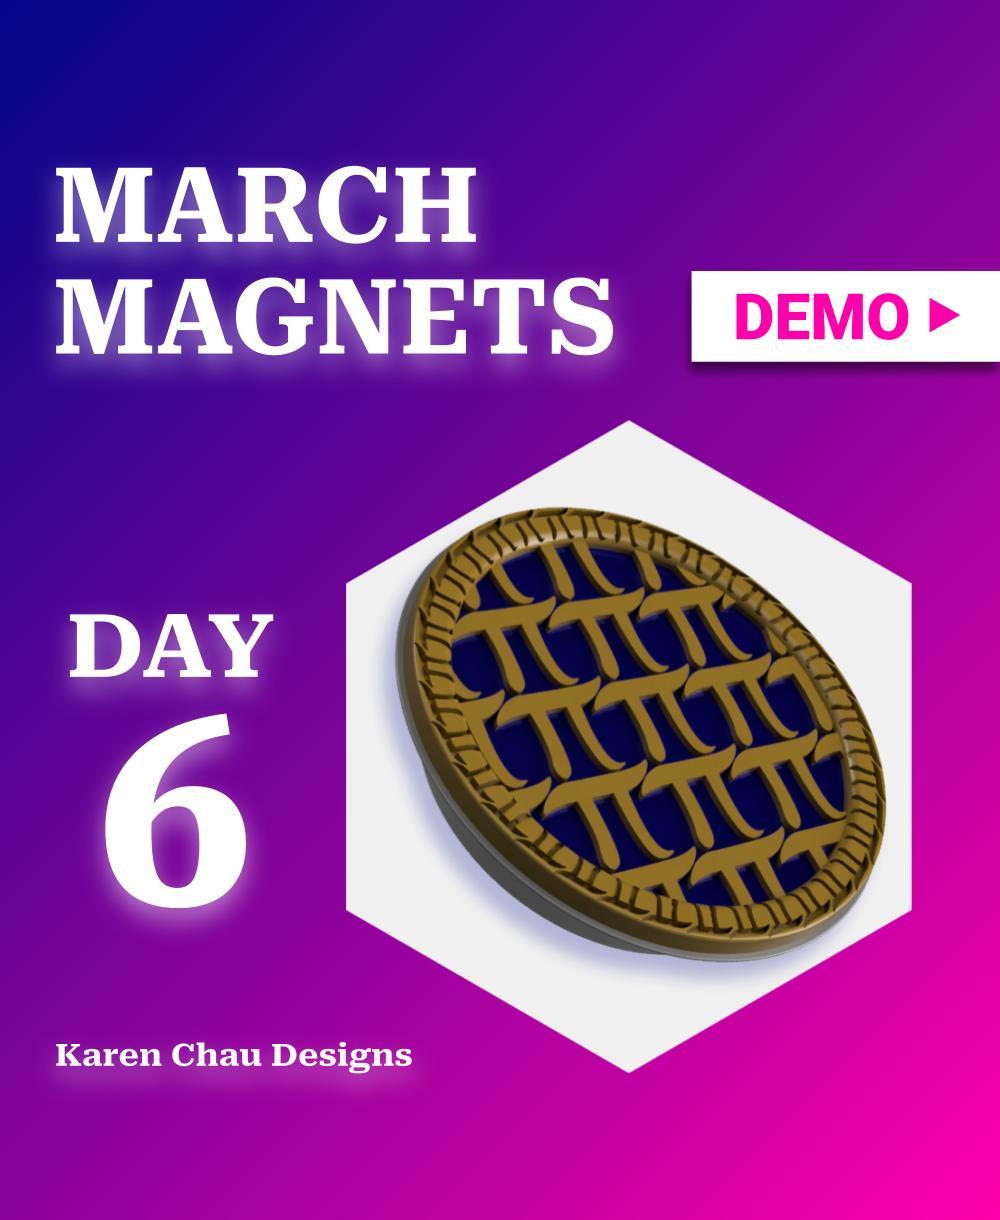 March Magnets - Day 6 #marchmagnets | Lattice pie with pi symbols 3d model